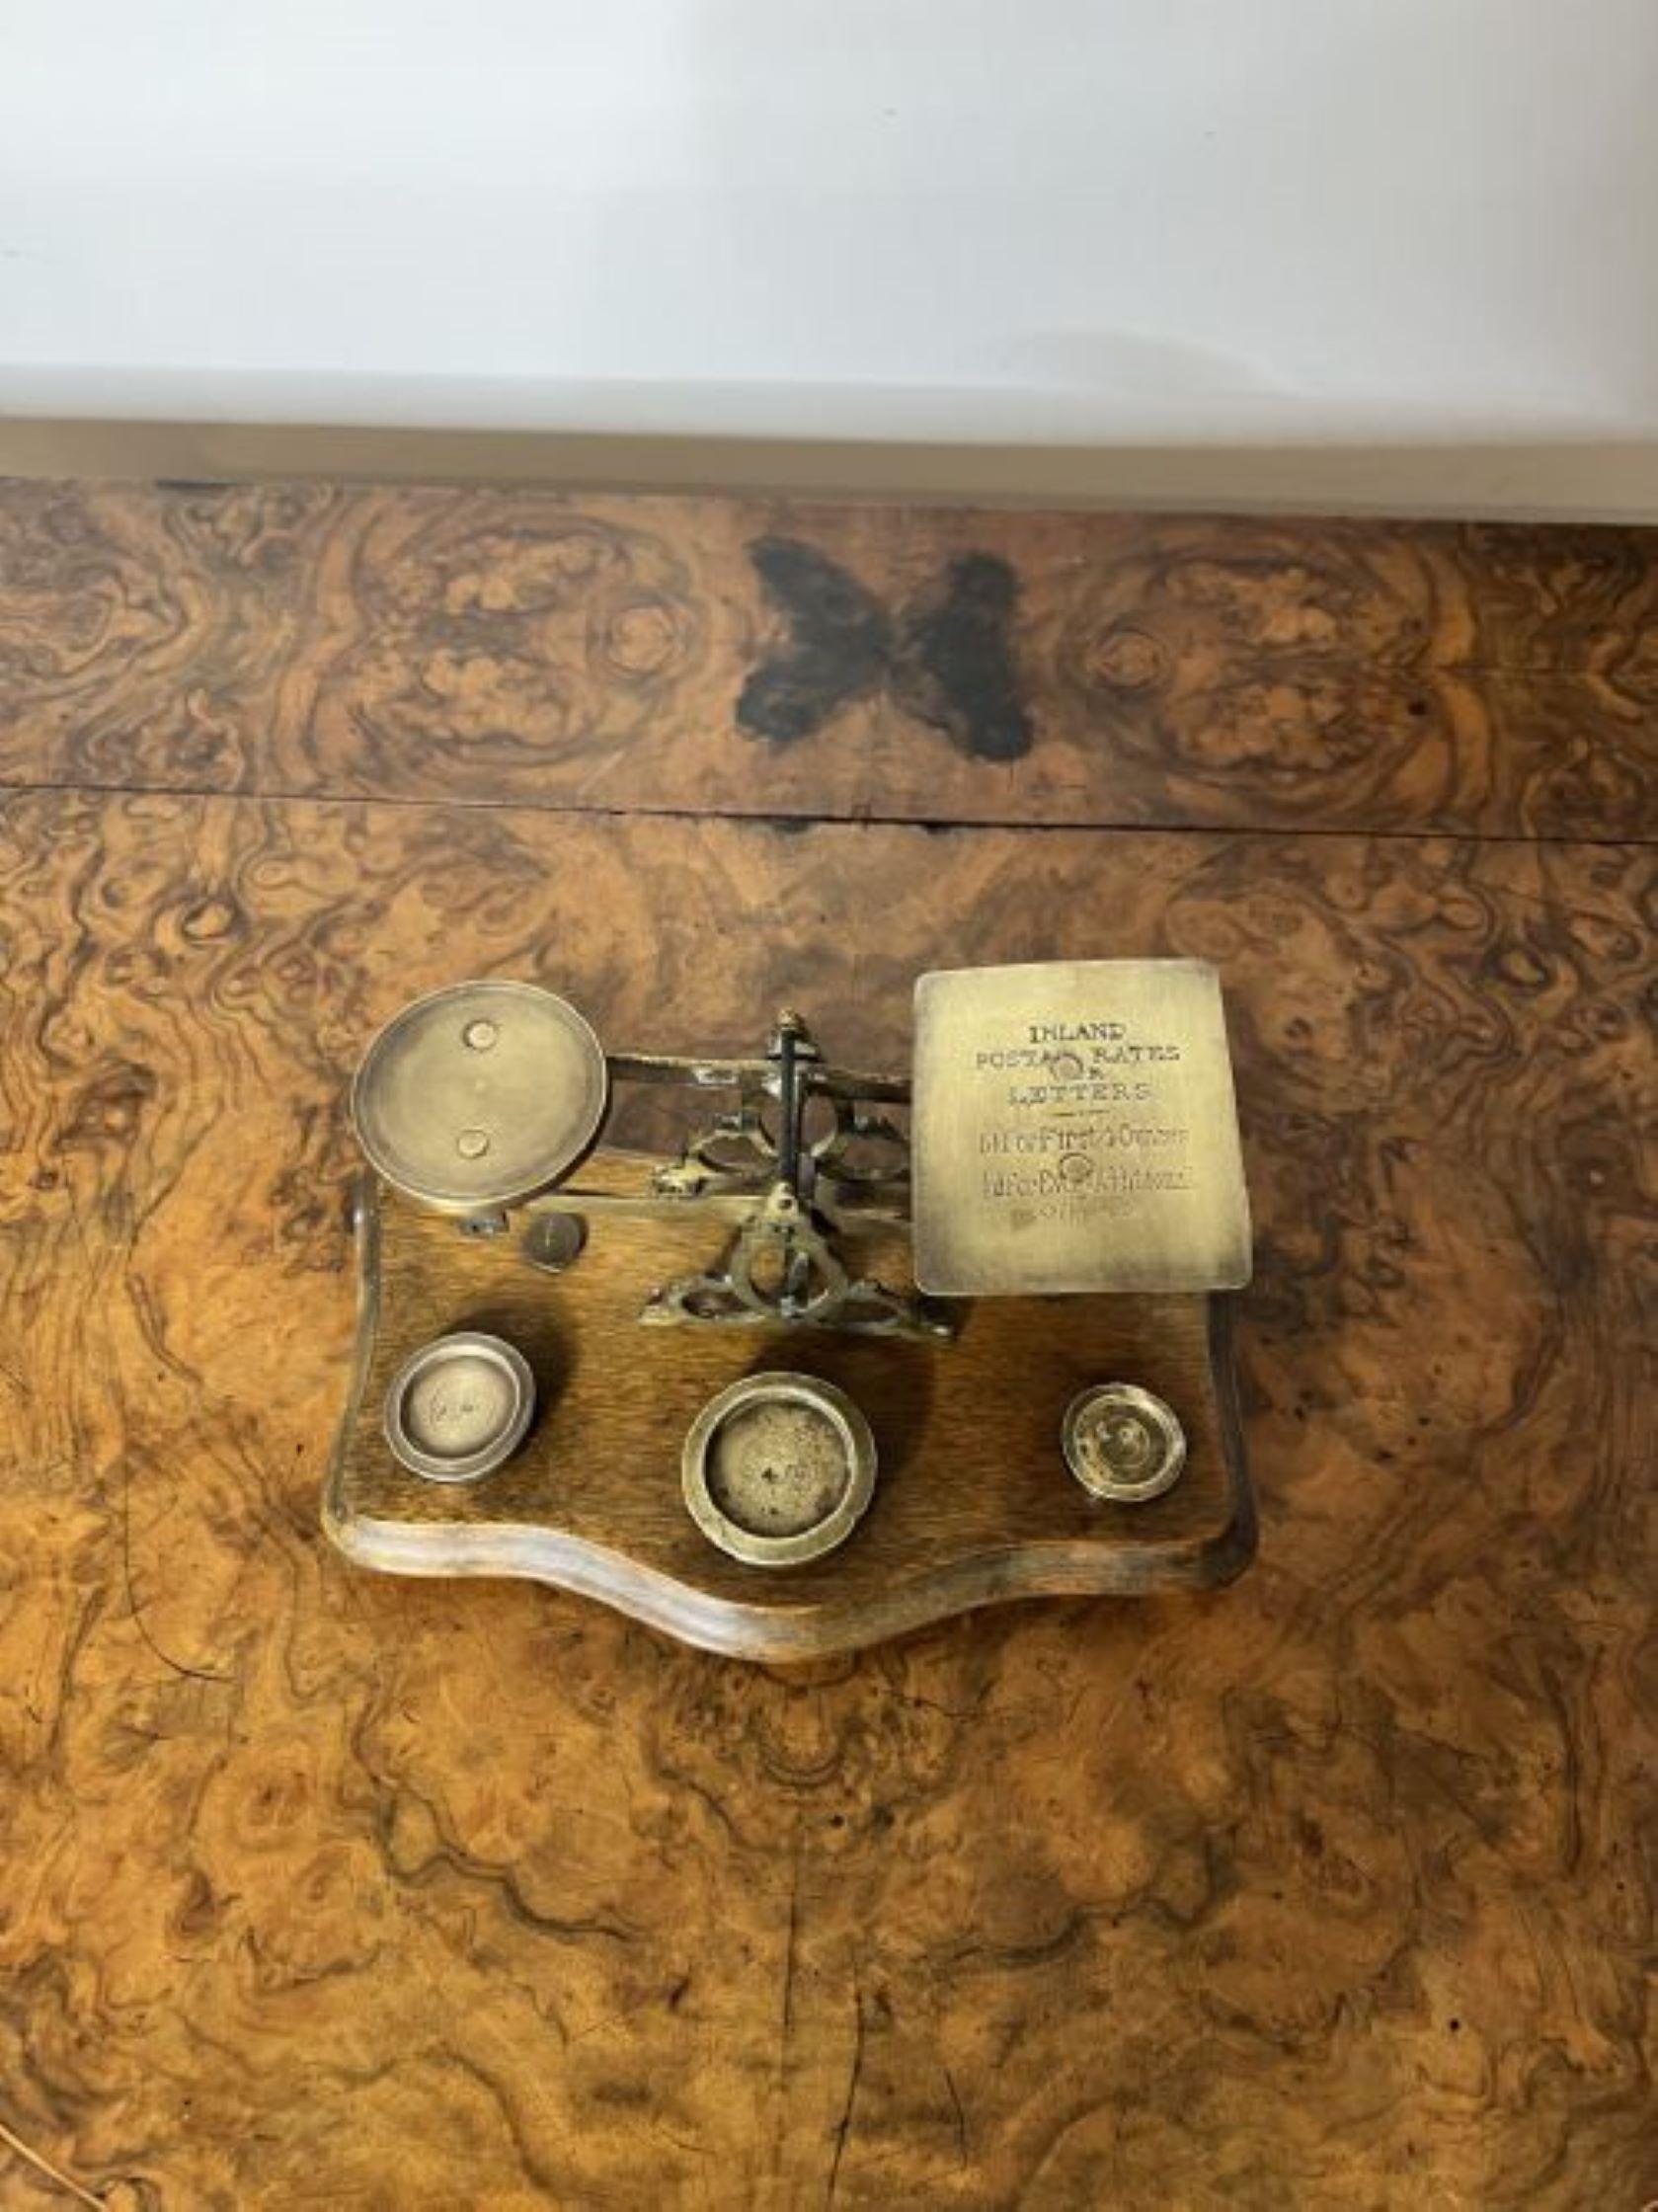 Lovely pair of antique Victorian quality brass Irish postal scales having a lovely pair of antique Victorian brass postal scales with brass weights mounted on a wooden shaped base.

D. 1880